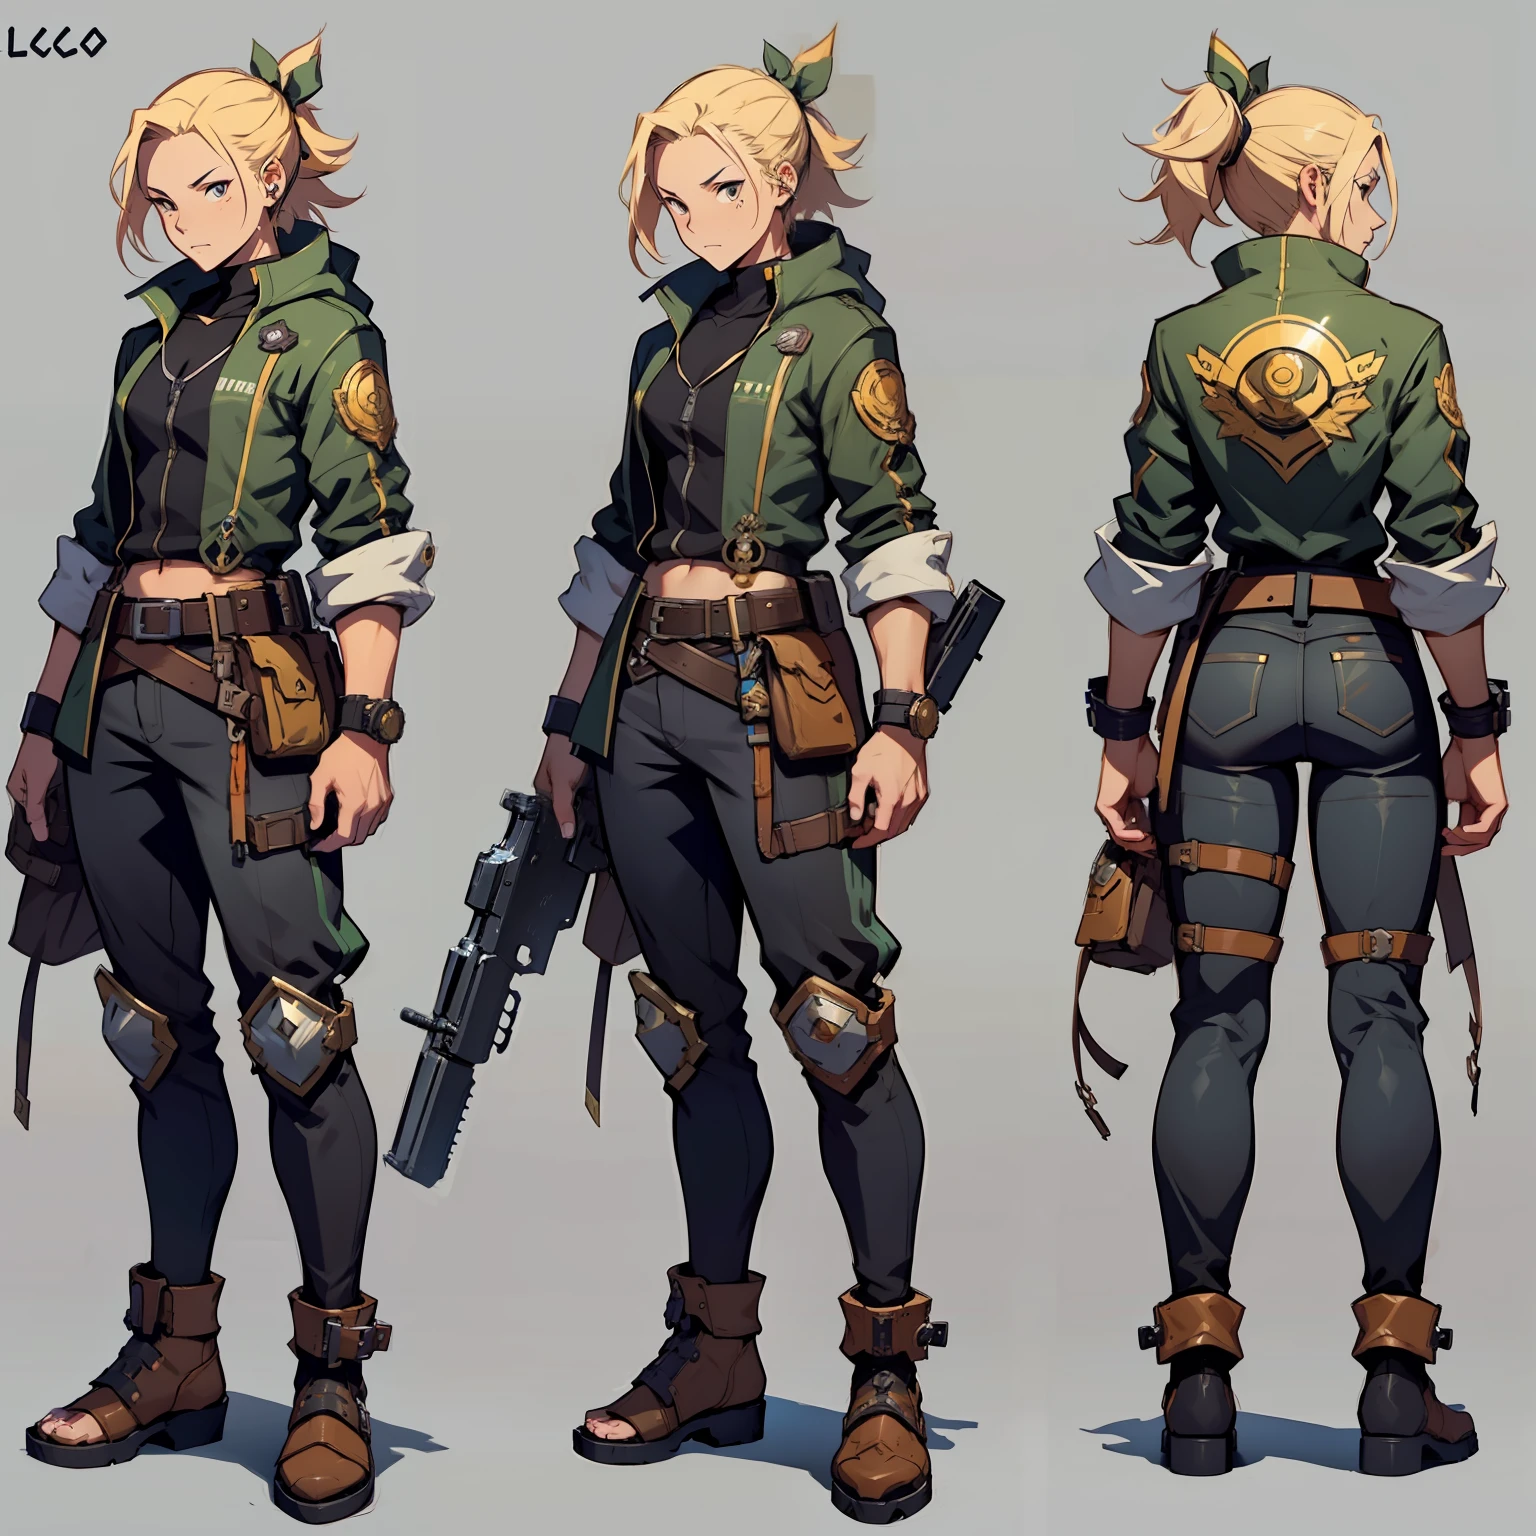 Close-up of a man in a gun costume, ((character concept art)), ((character design sheet, same character, front, side, back)) maple story character art, video game character design, video game character design, maple story gun girl, expert high detail concept art, metal bullet concept art, funny character design, Lucio as a woman, gravity rush inspiration, sticky tar. Concept art, belt buckle at waist, steampunk weapon,